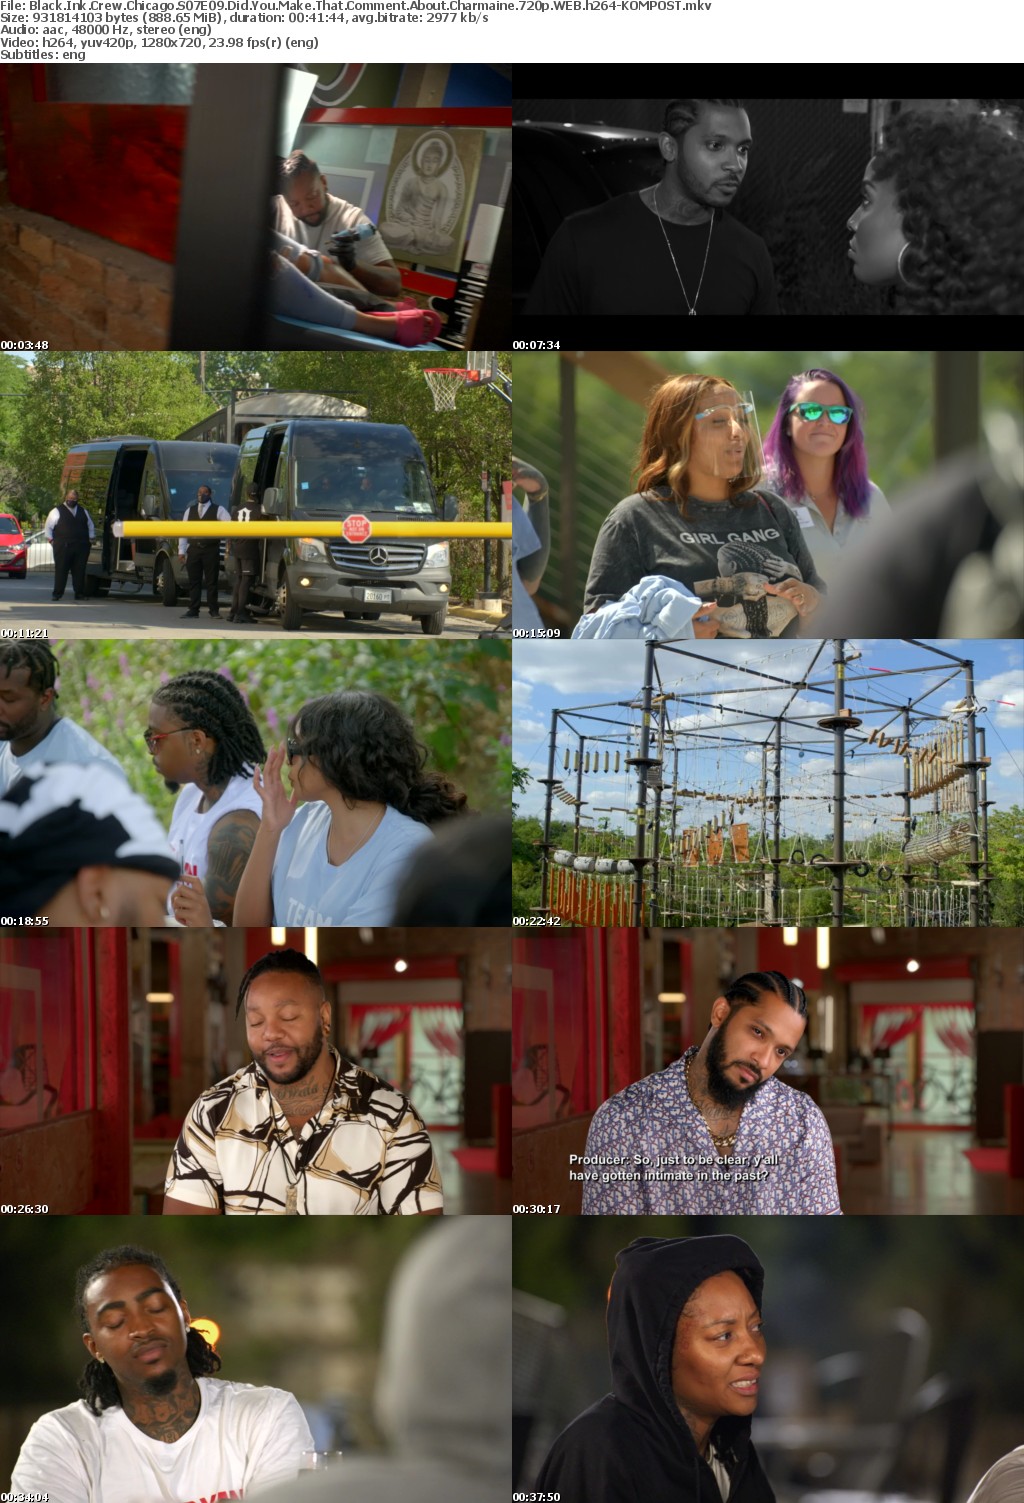 Black Ink Crew Chicago S07E09 Did You Make That Comment About Charmaine 720p WEB h264-KOMPOST